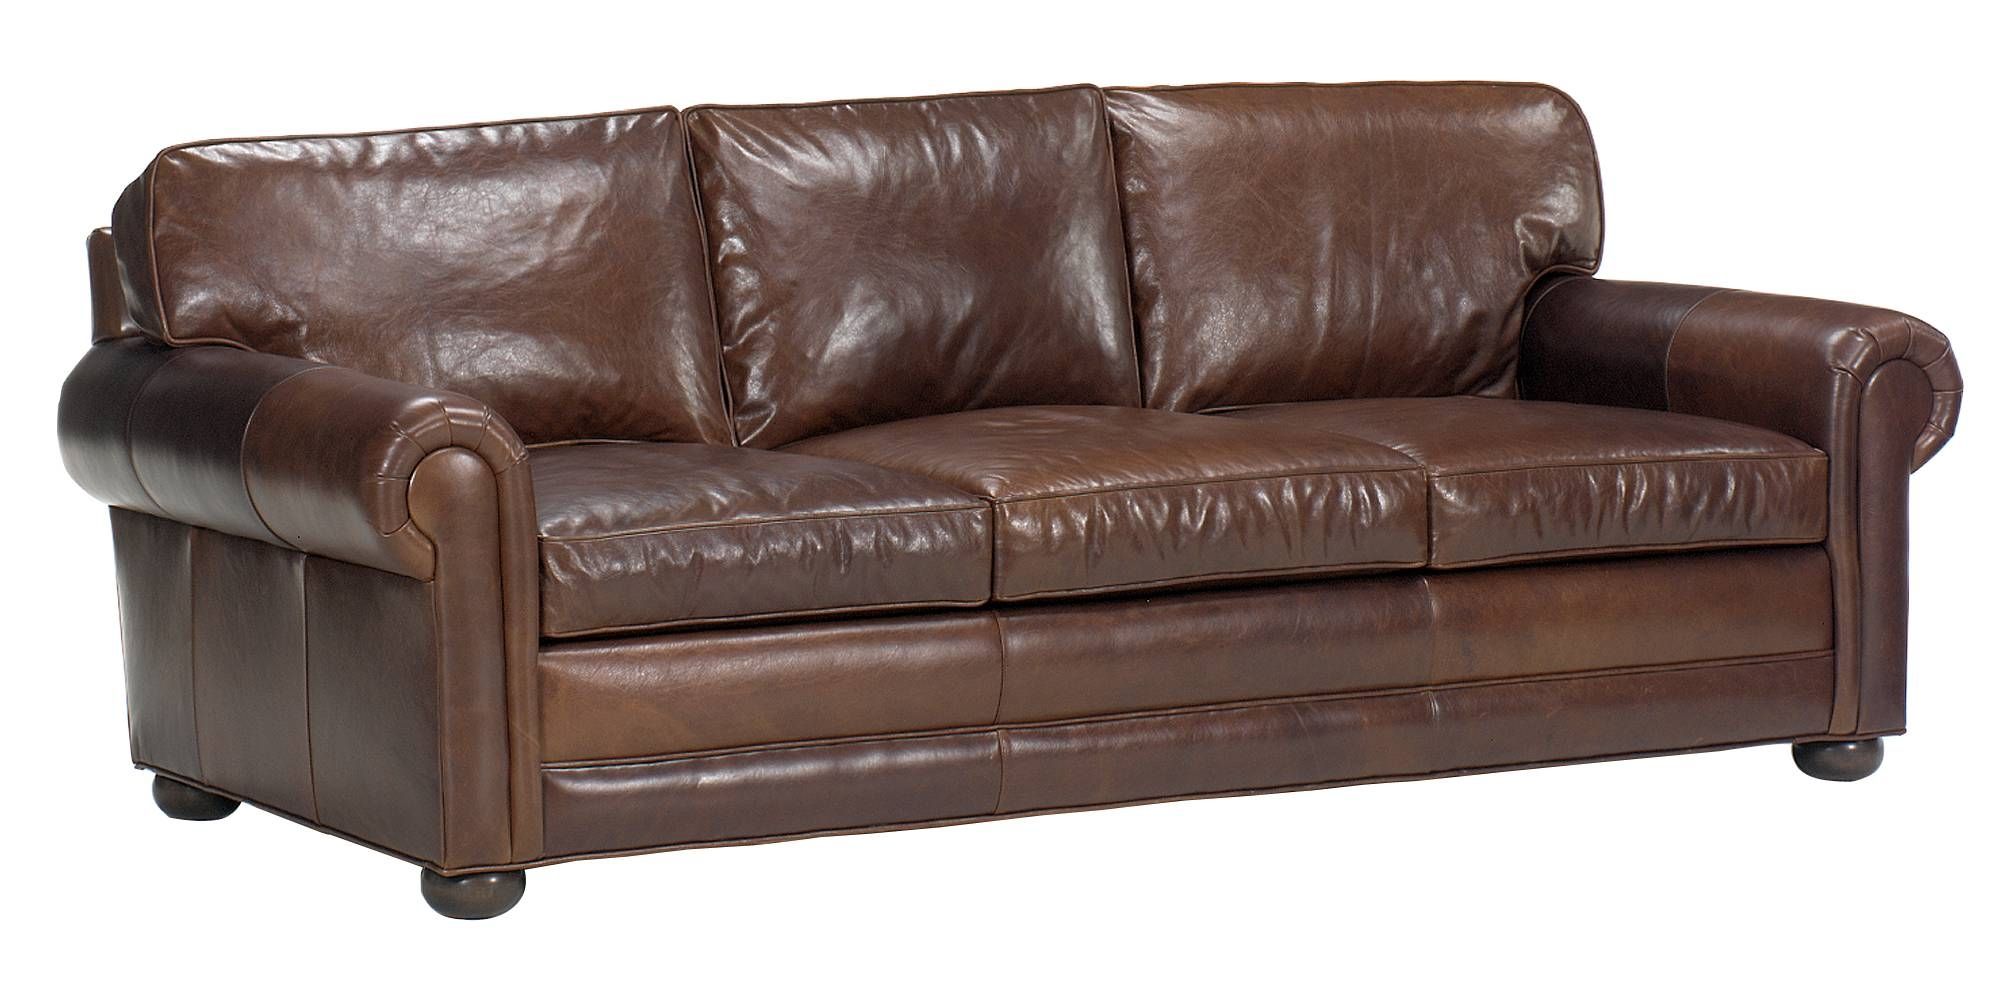 Oversized Large Deep Seated Leather Furniture | Club Furniture Regarding Wide Sofa Chairs (View 6 of 15)